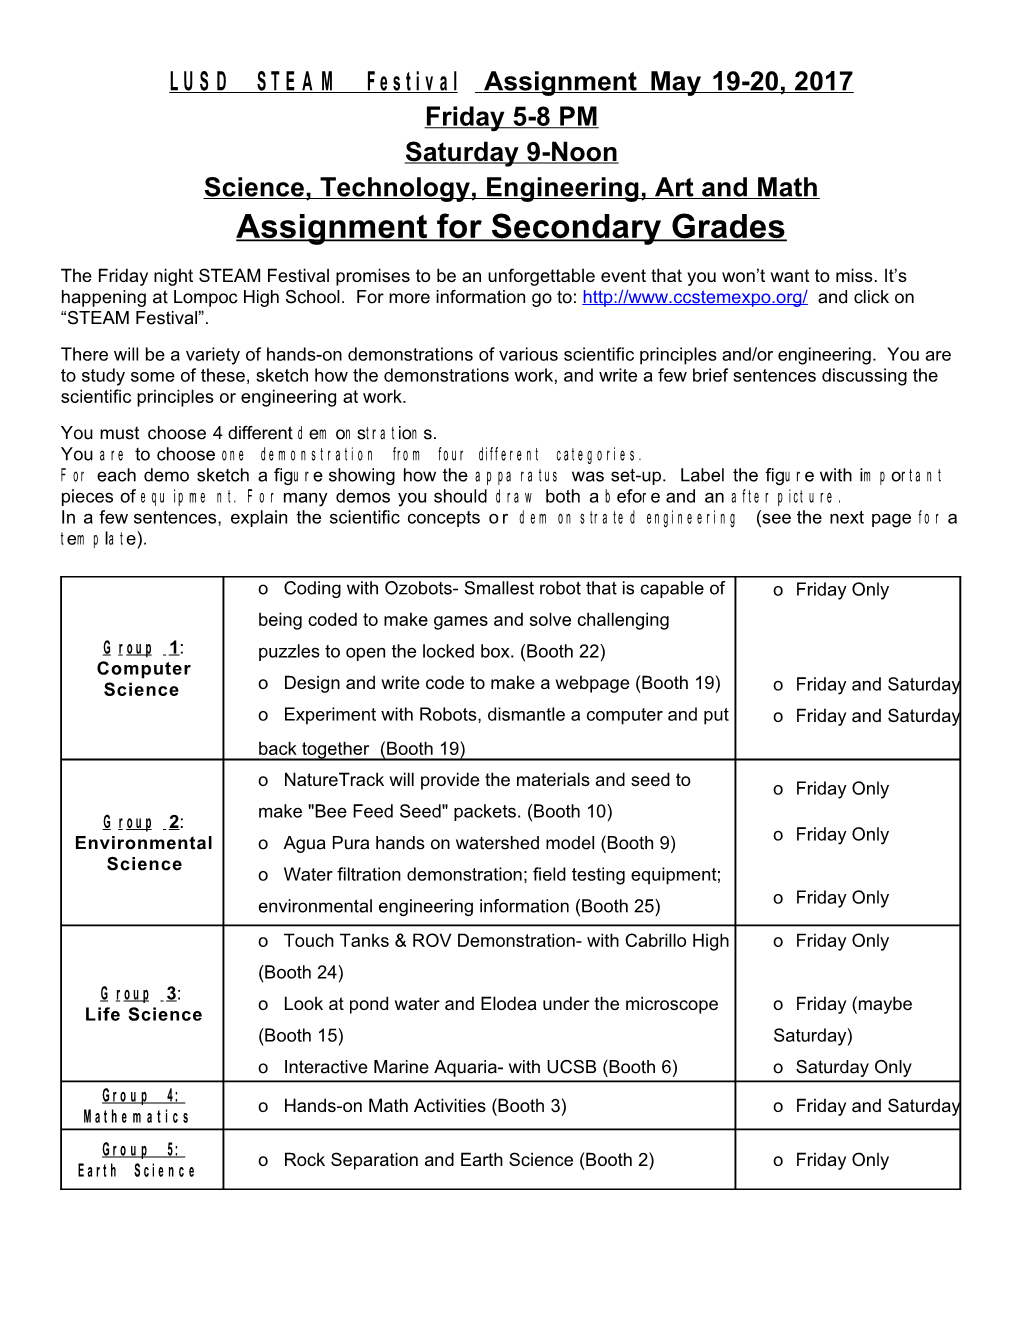 Science, Technology, Engineering, Art and Math